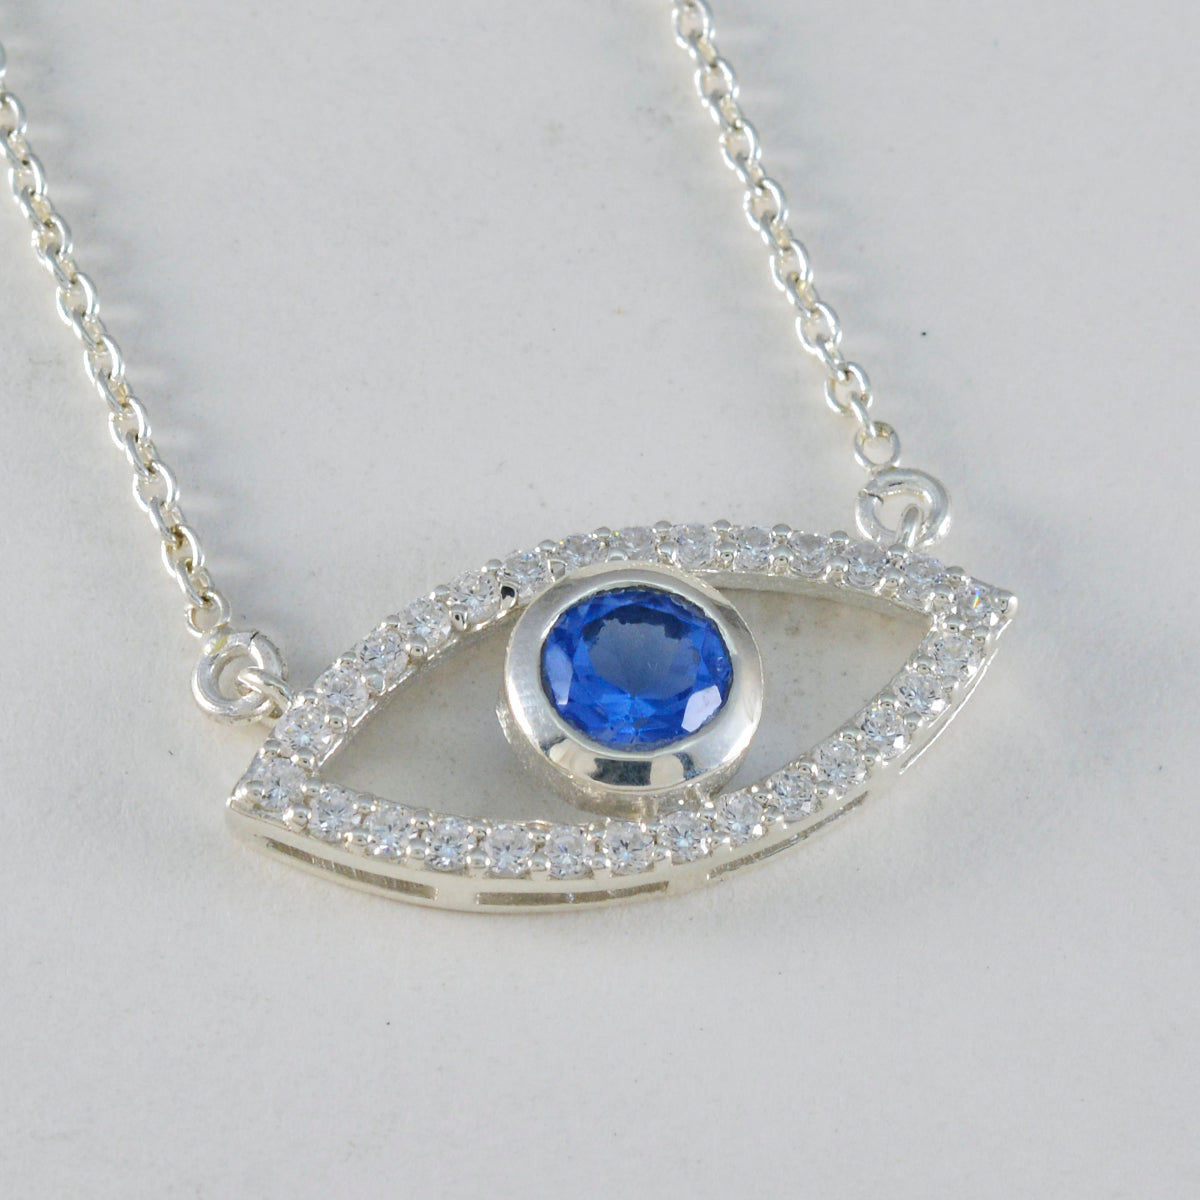 Riyo Fanciable Gemstone Round Faceted Blue Blue Sapphire Cz 1145 Sterling Silver Pendant Gift For Birthday